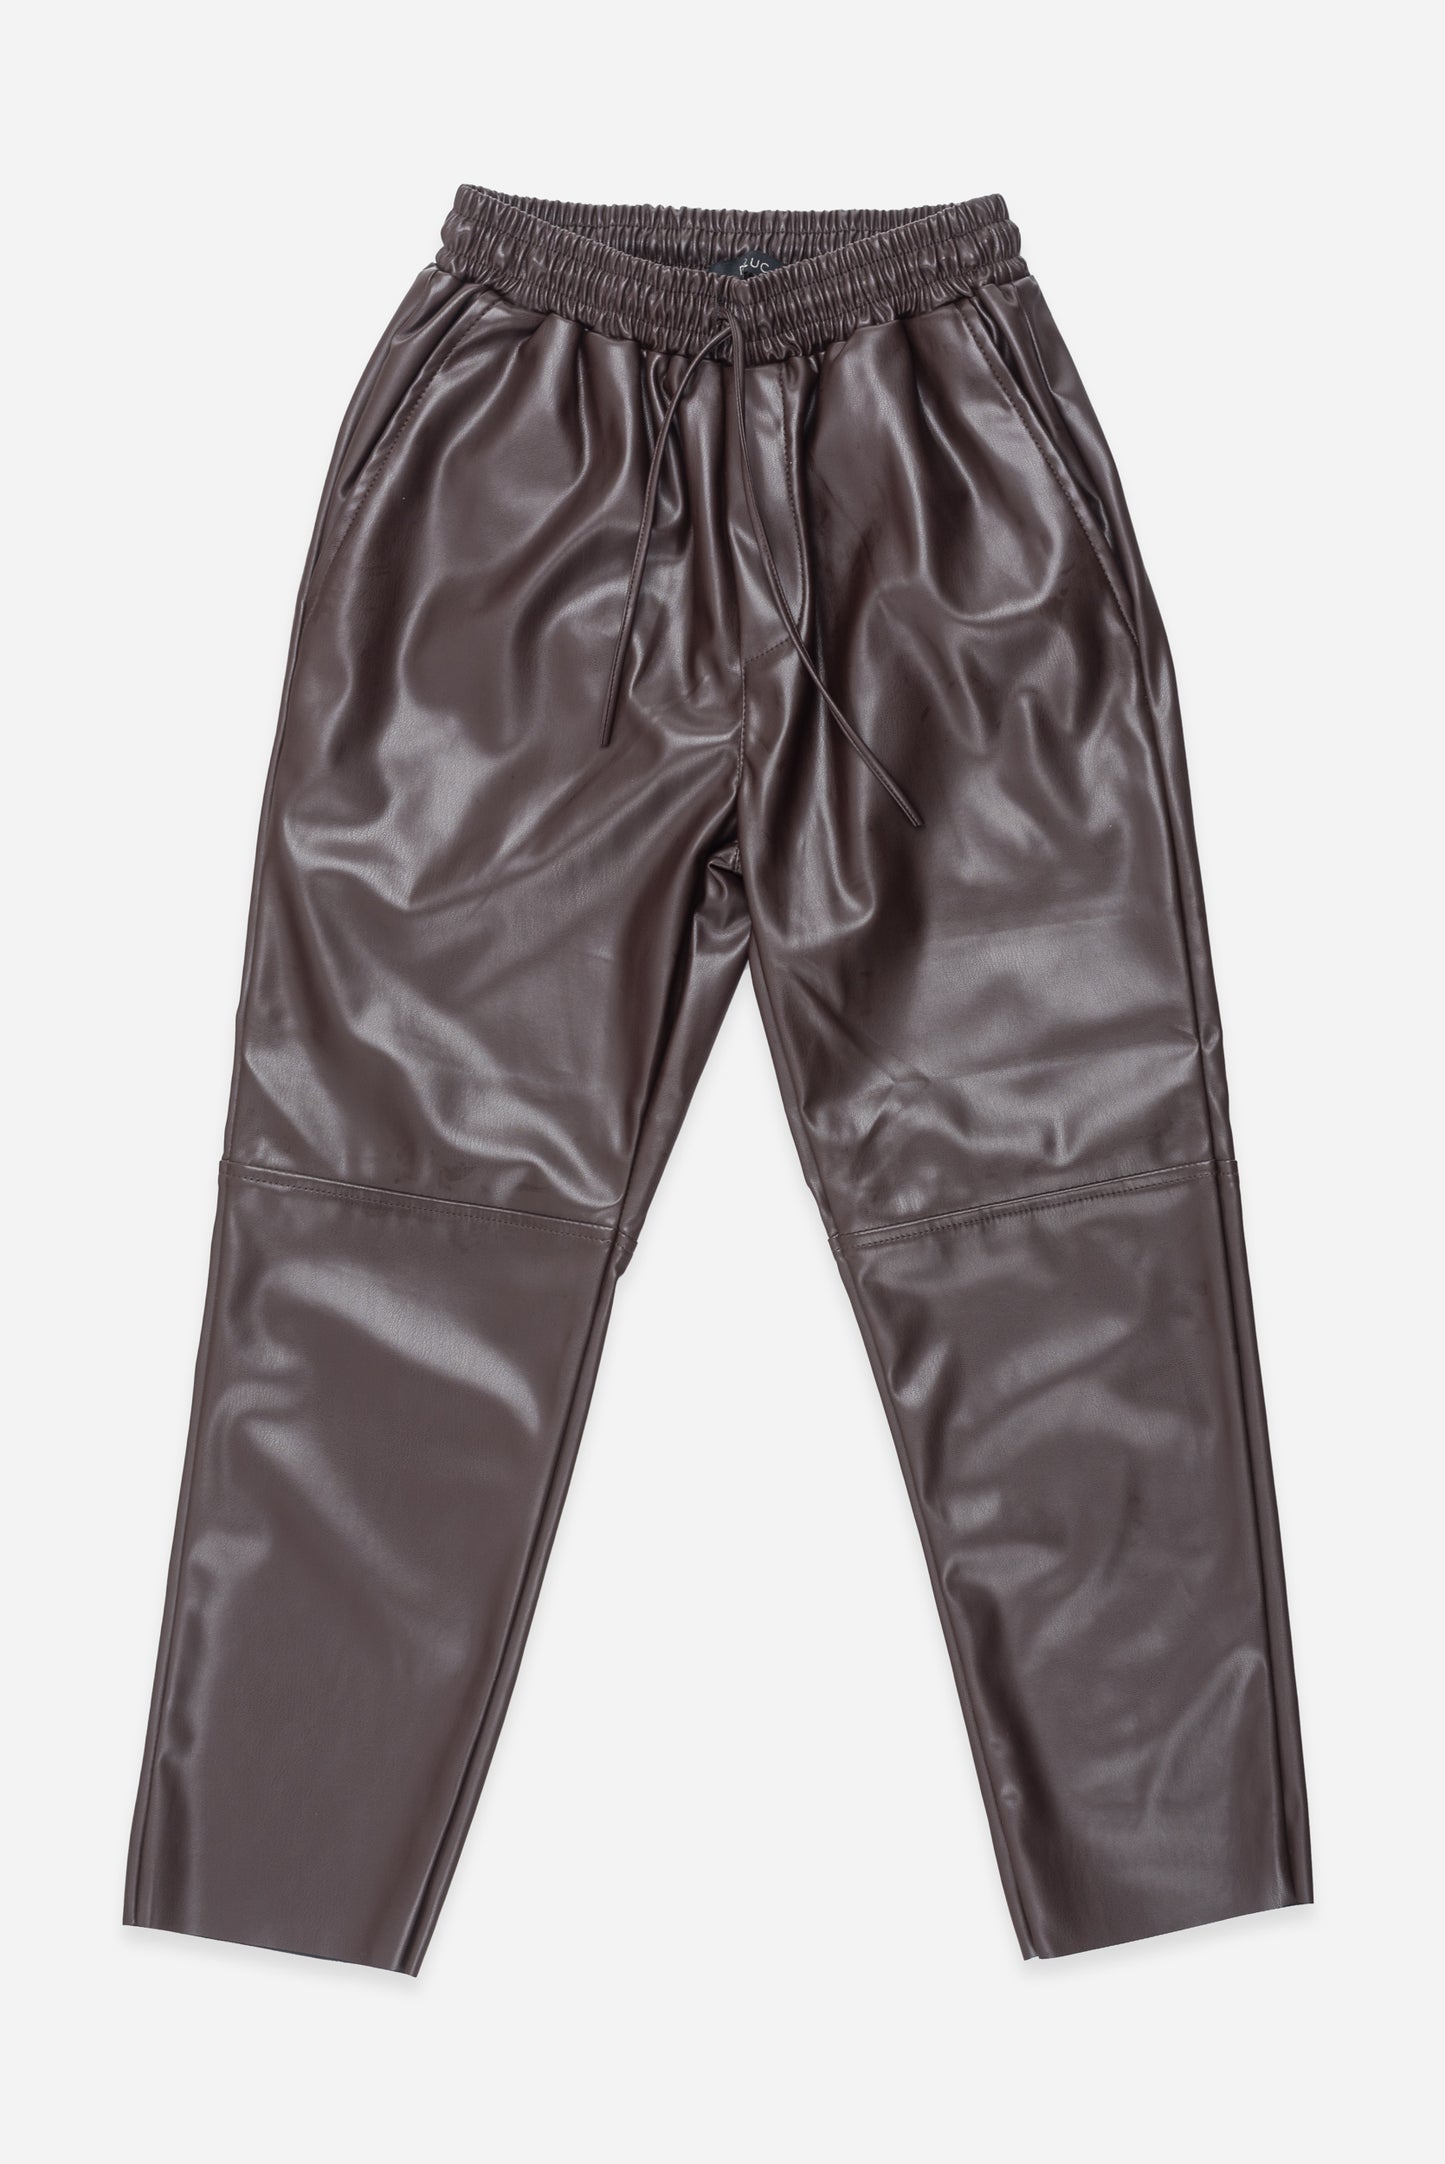 Fleetwood Pant - Dark Chocolate – Ethereal Boutique